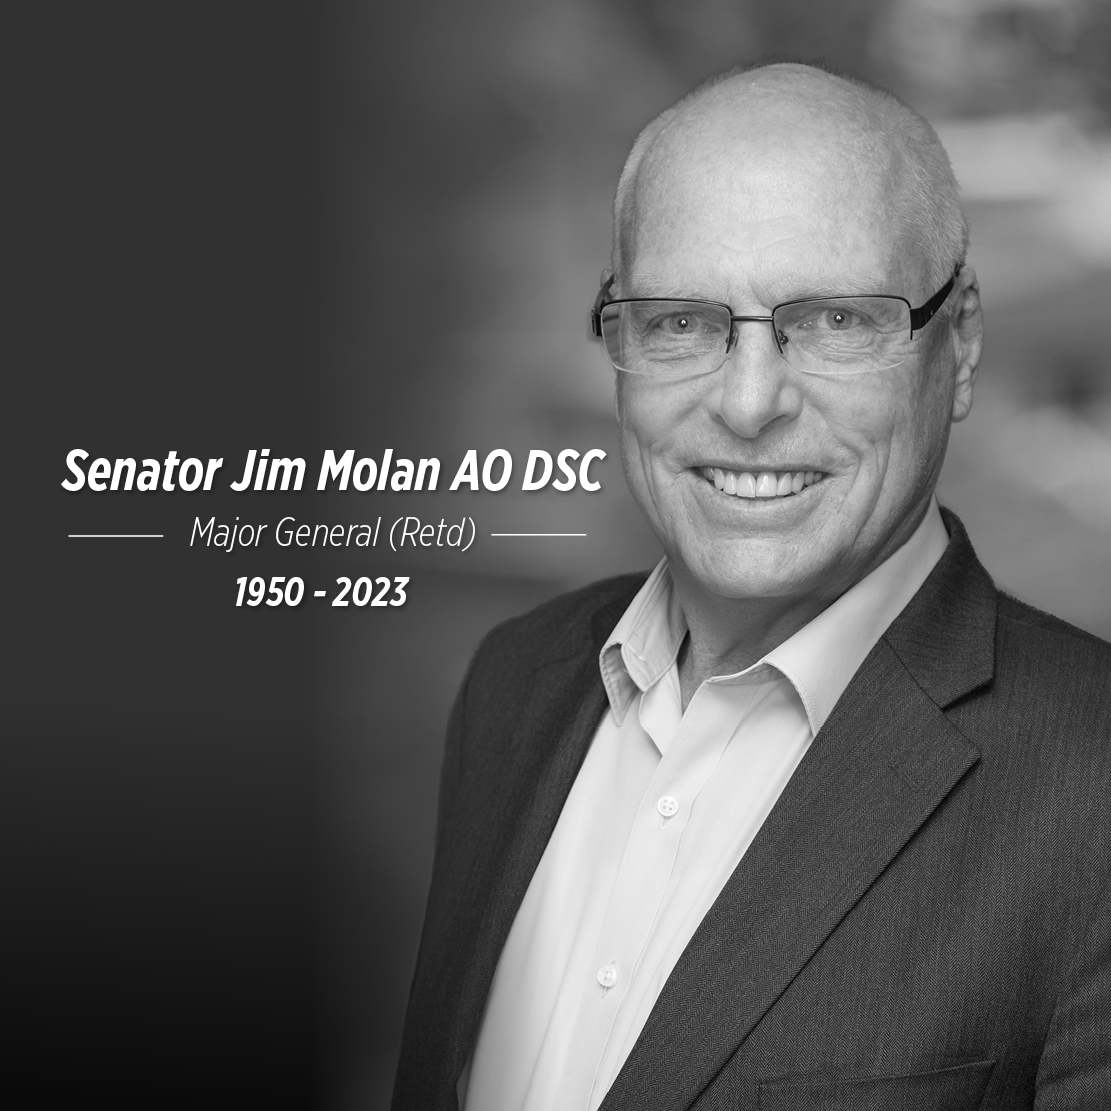 Liberal Party NSW: Vale Retired Major General and Liberal Senator @JimMolan AO DSC. …